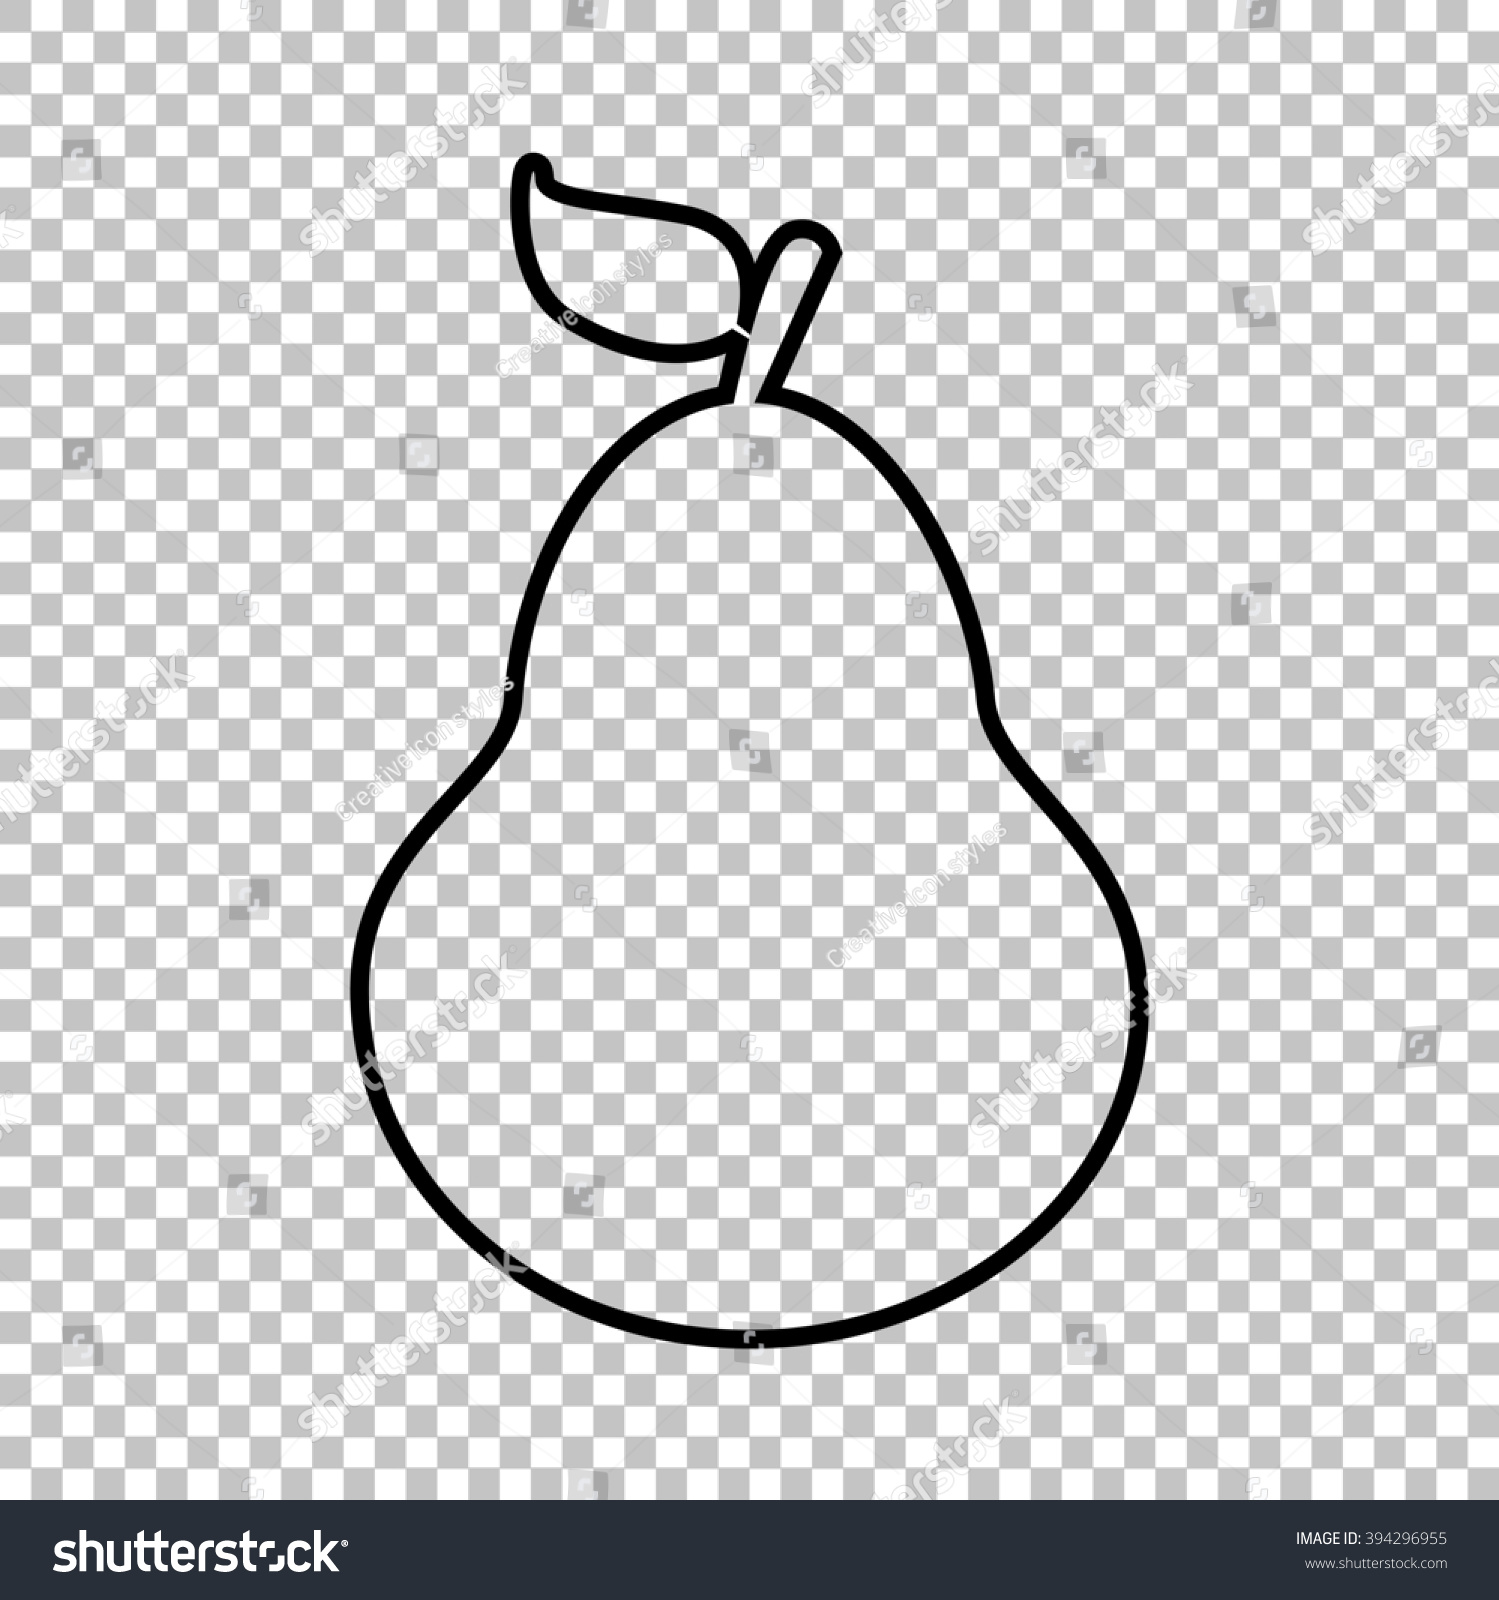 Pear Line Icon On Transparent Background Stock Illustration